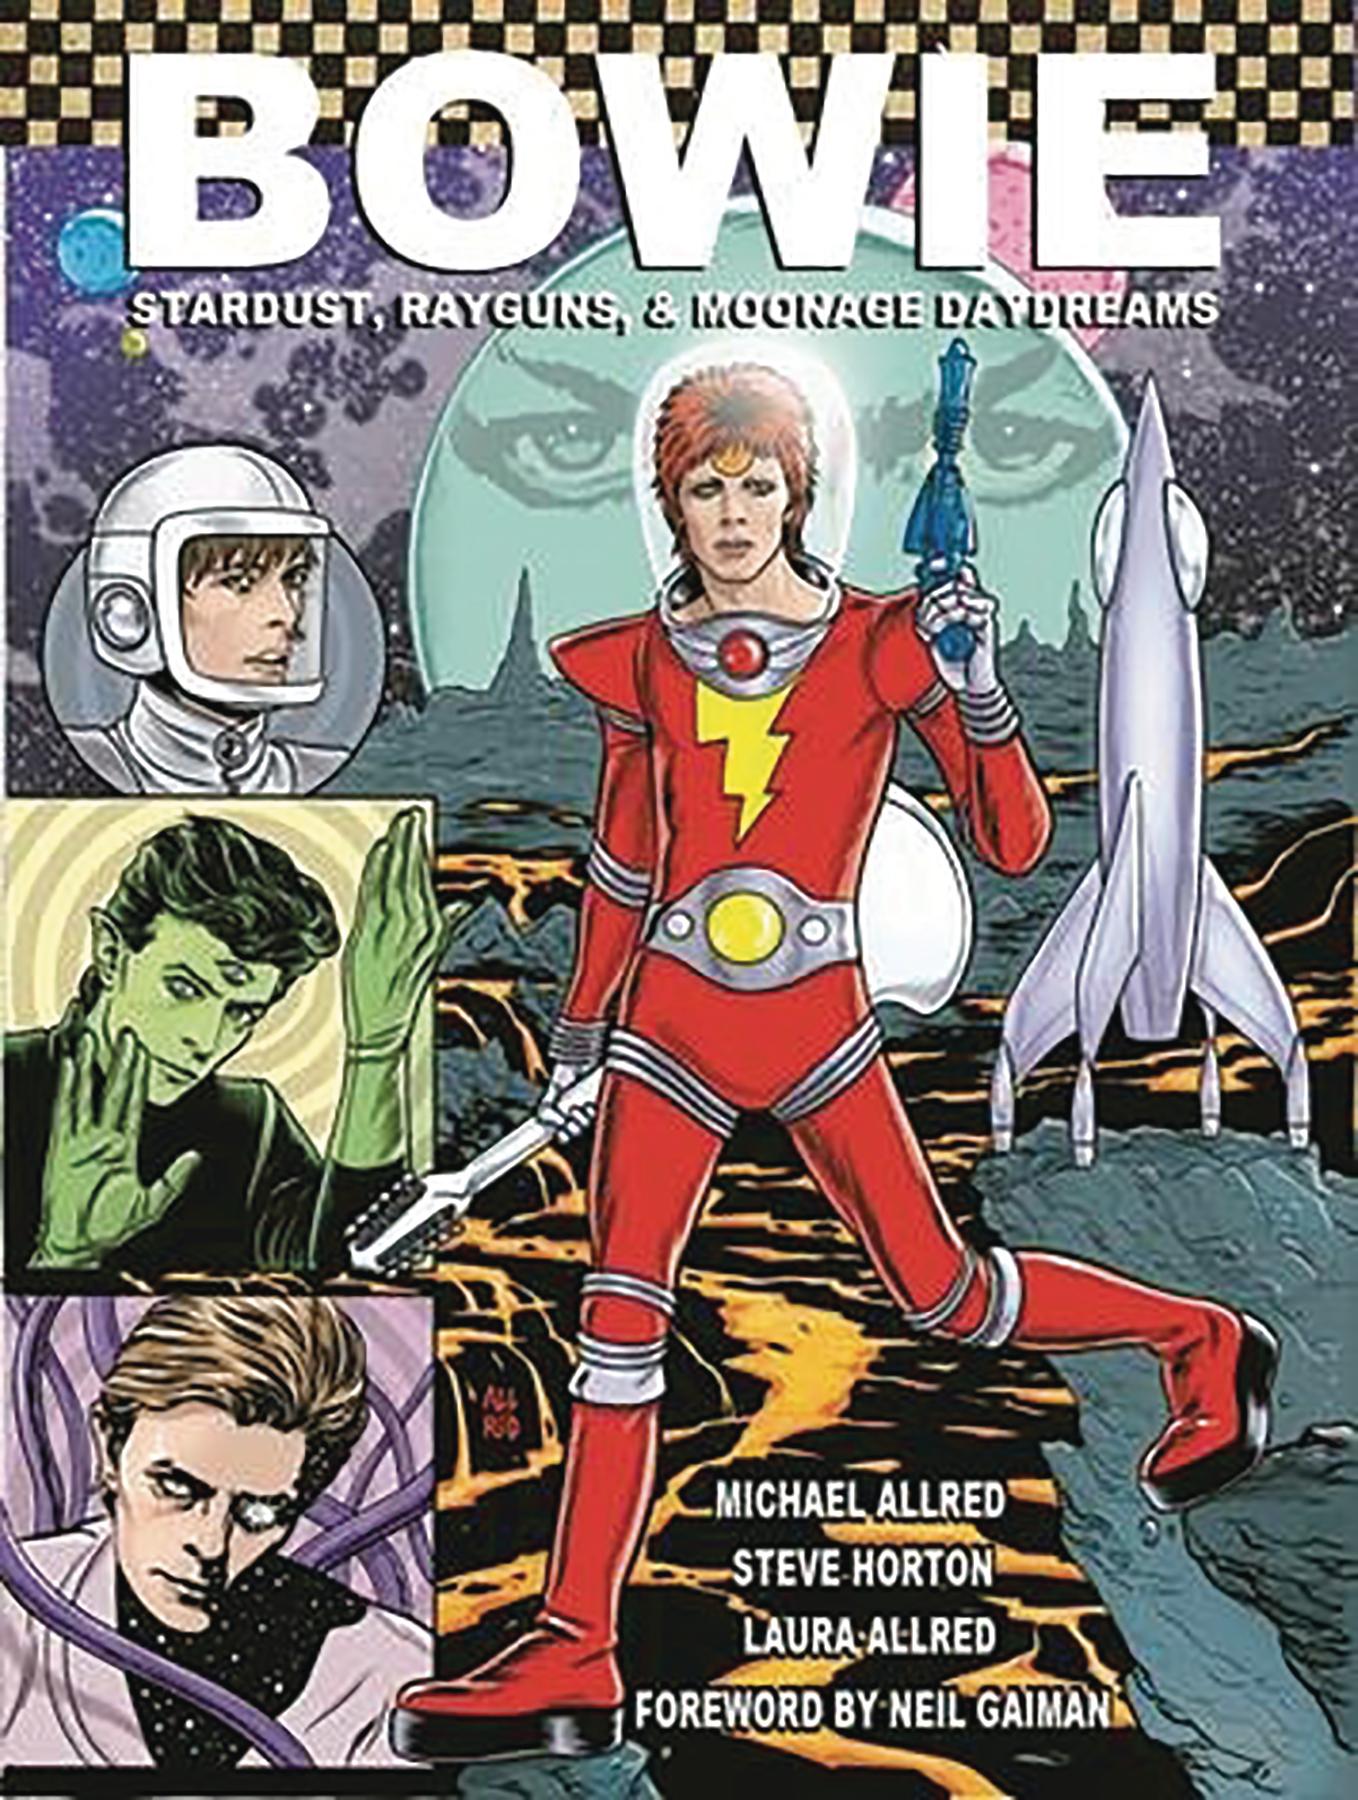 Bowie Stardust Rayguns & Moonage Daydreams Px Hardcover Graphic Novel 2nd Edition